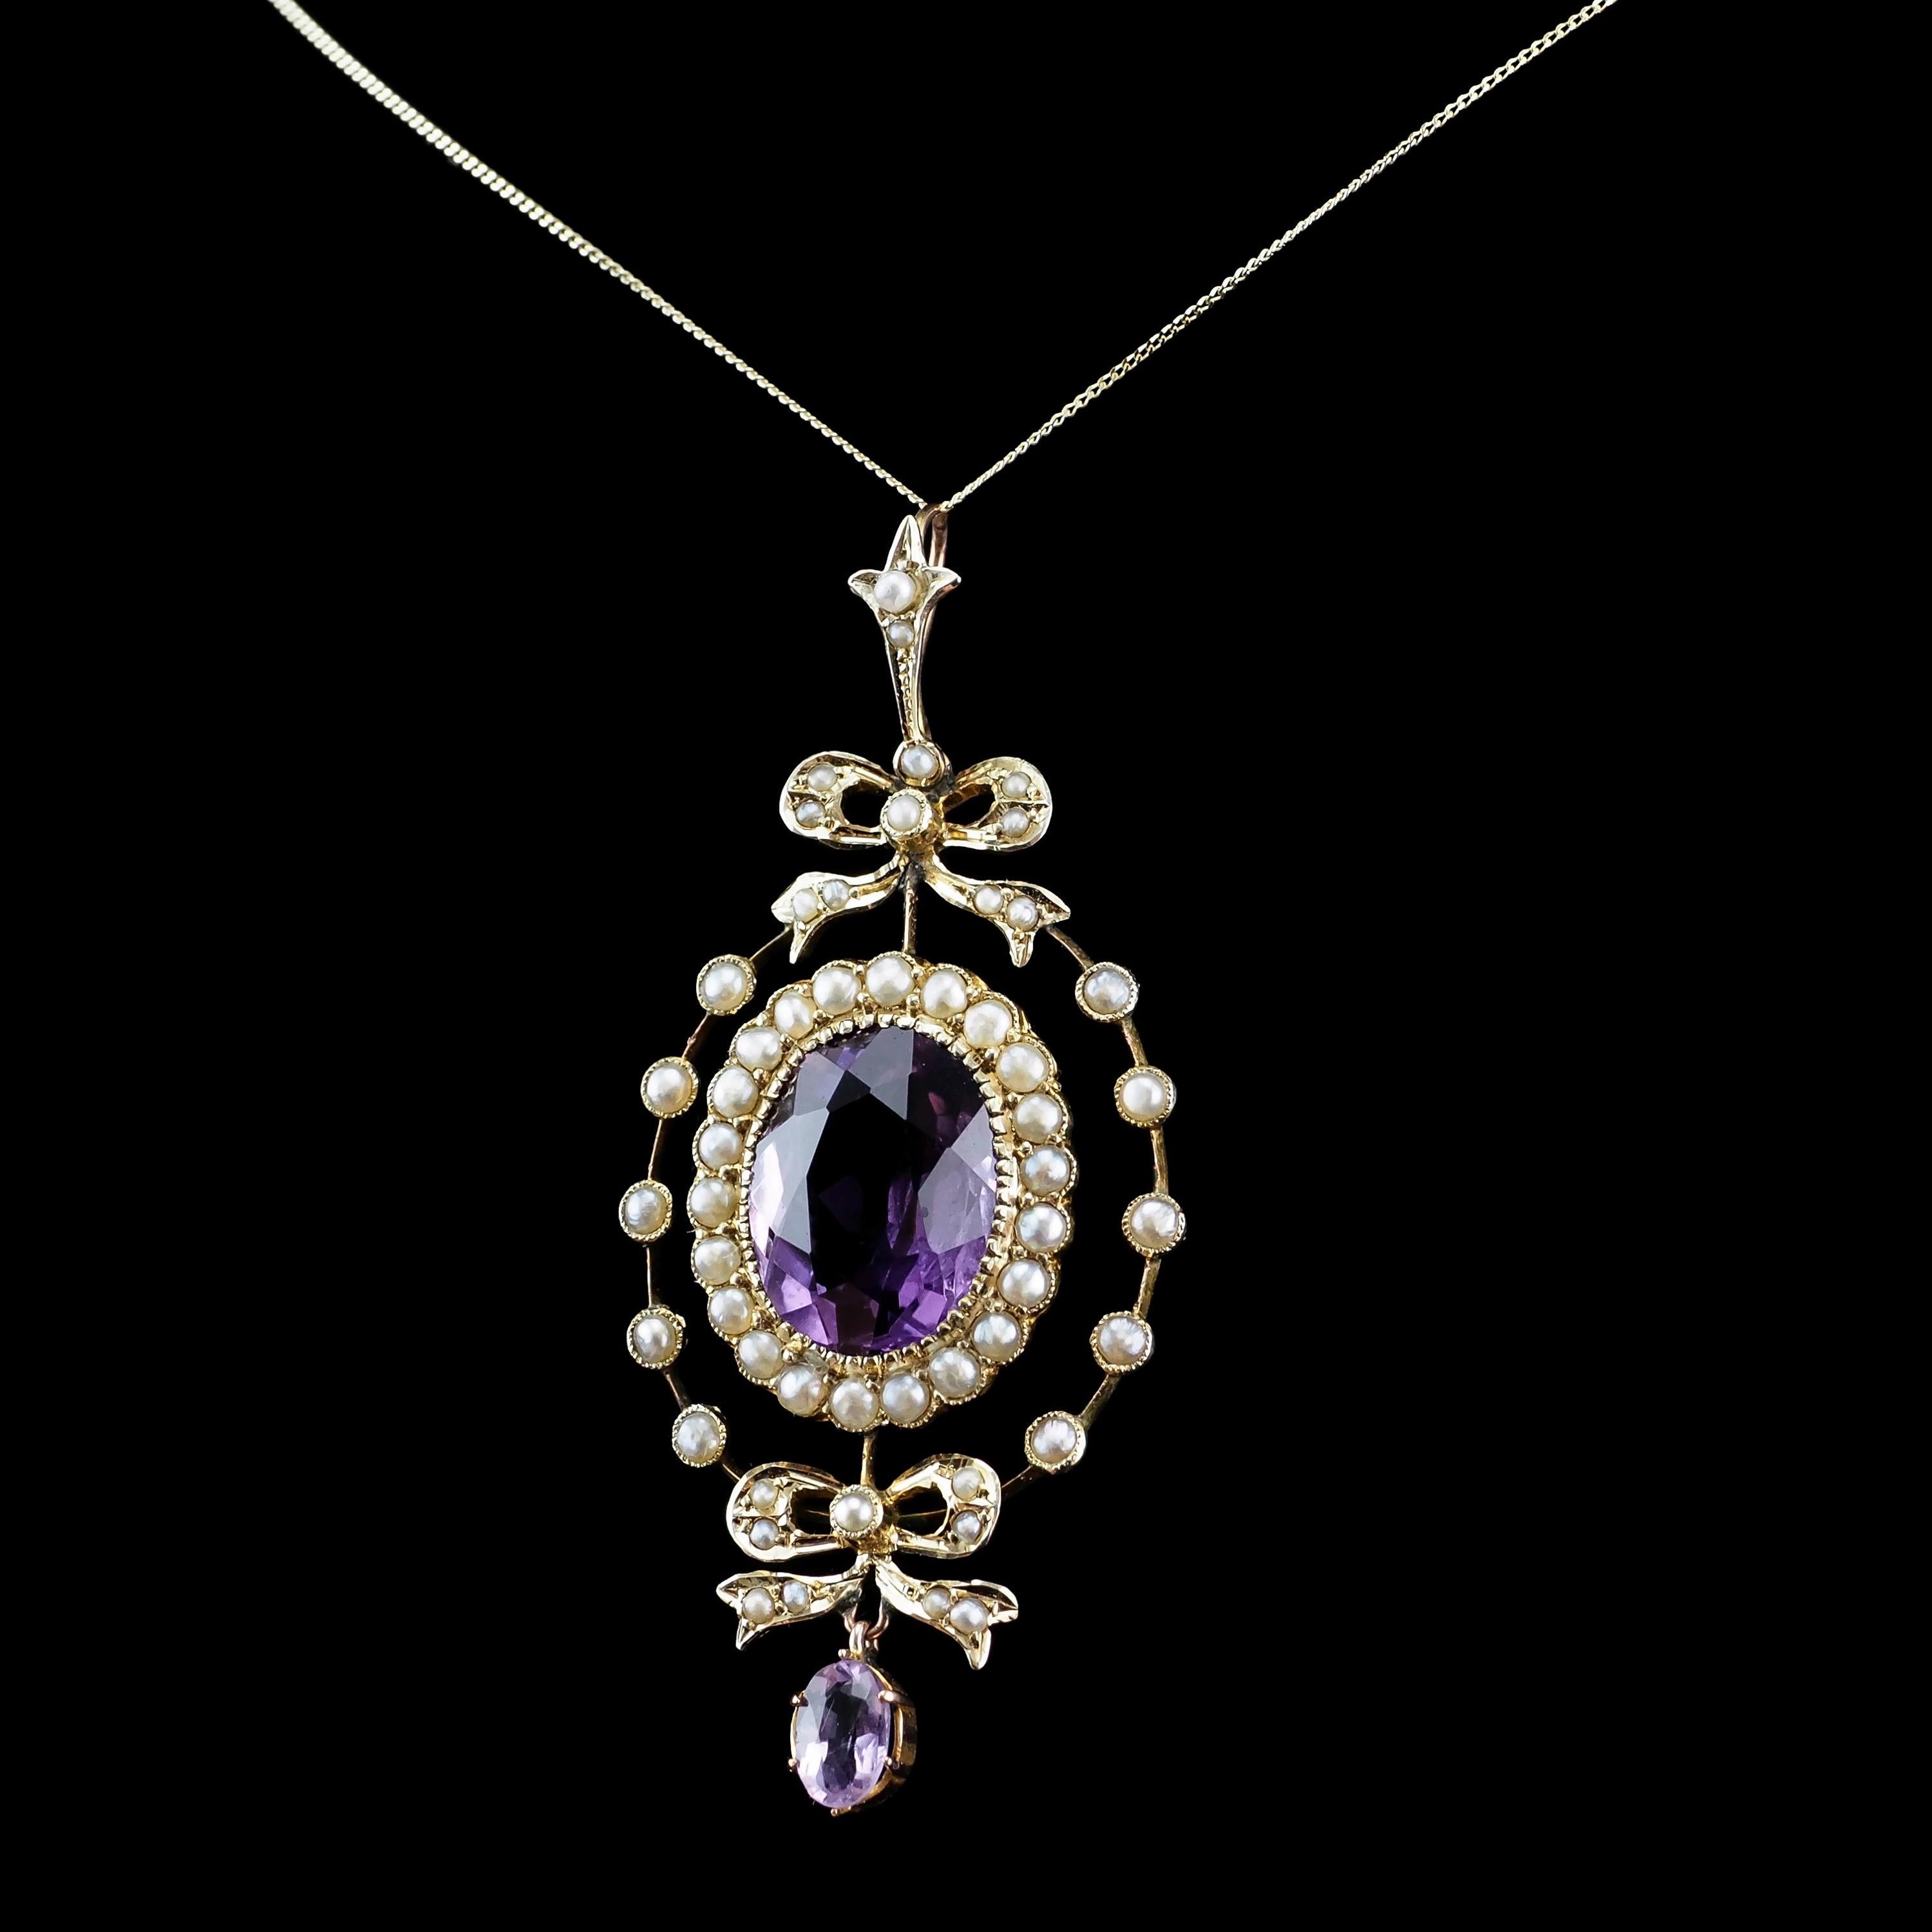 Antique Edwardian Amethyst & Seed Pearl 9k Gold Necklace Pendant, circa 1905 5